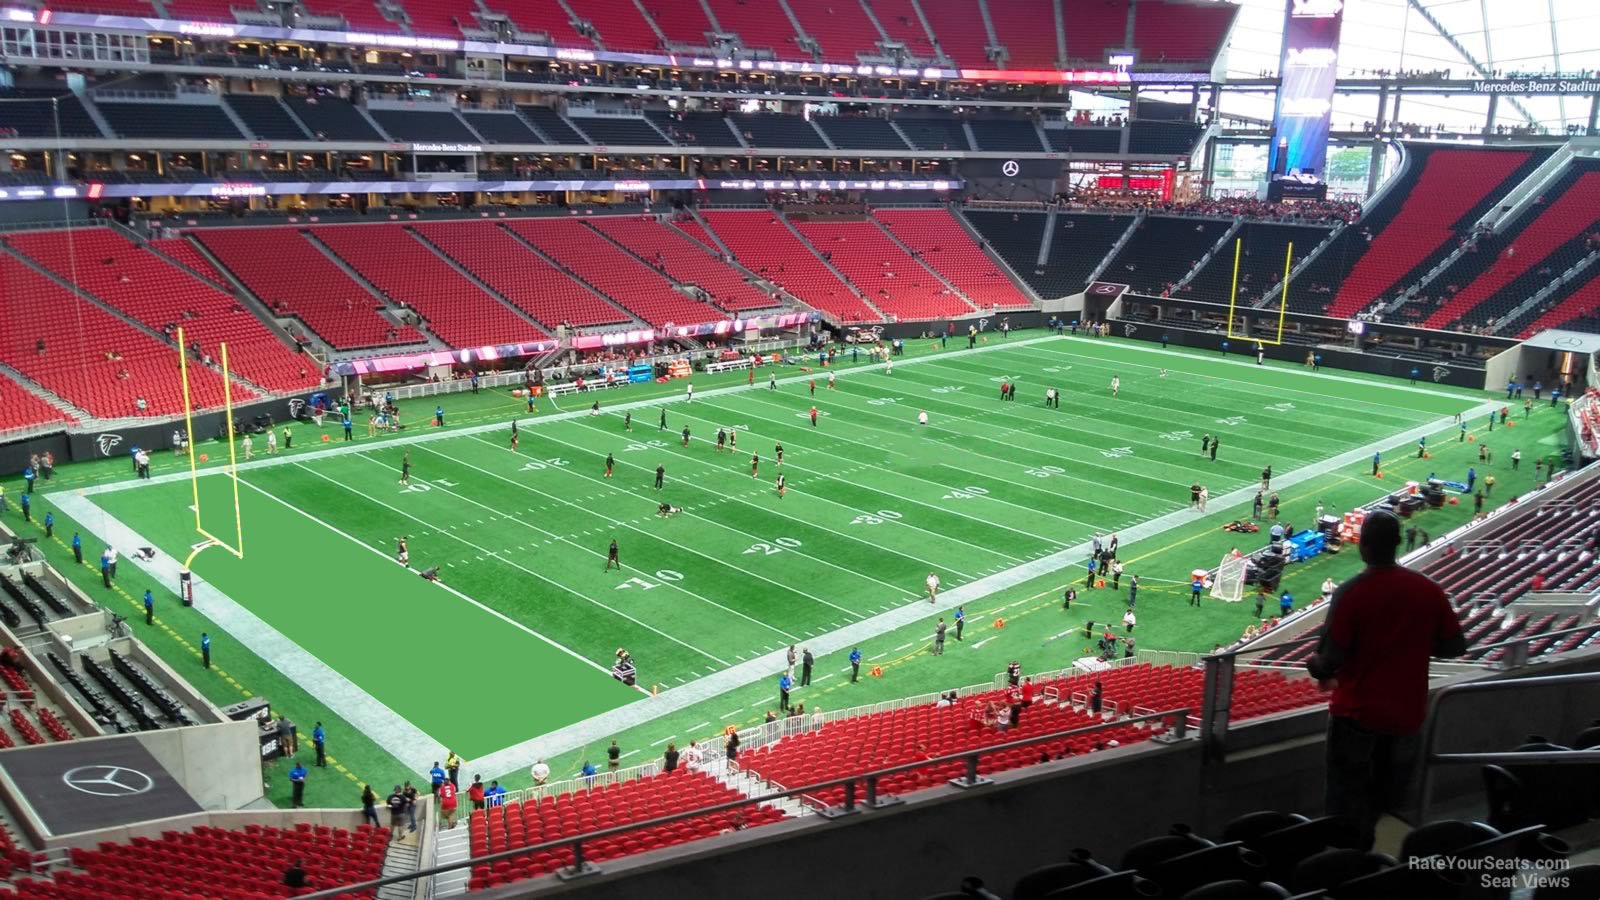 section 218, row 6 seat view  for football - mercedes-benz stadium